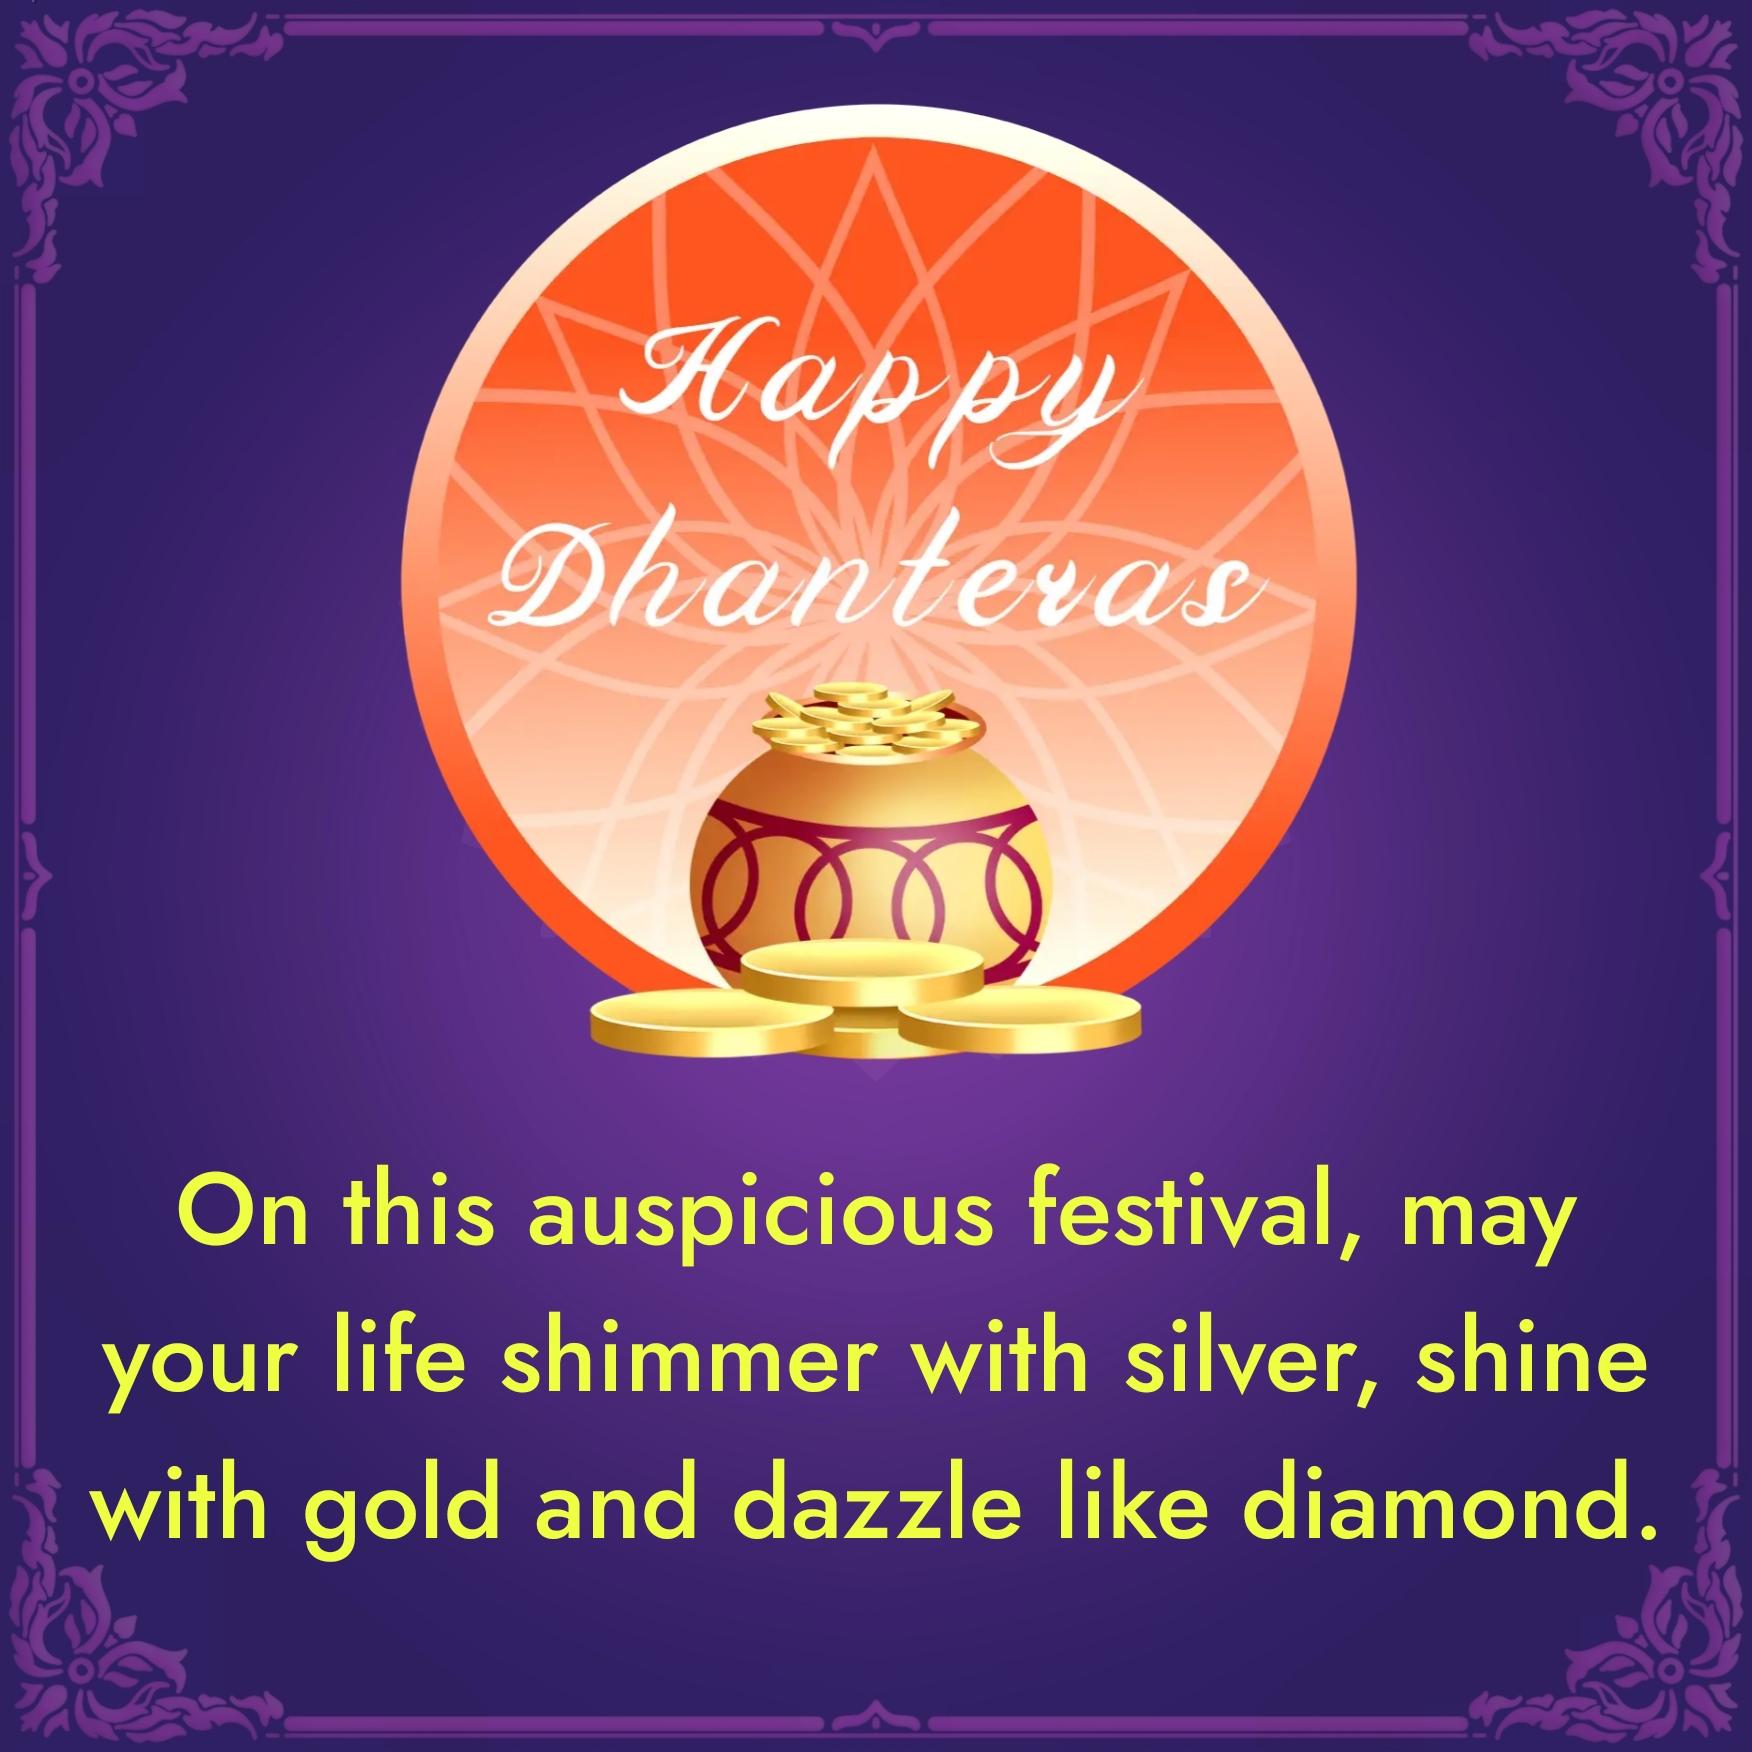 On this auspicious festival may your life shimmer with silver